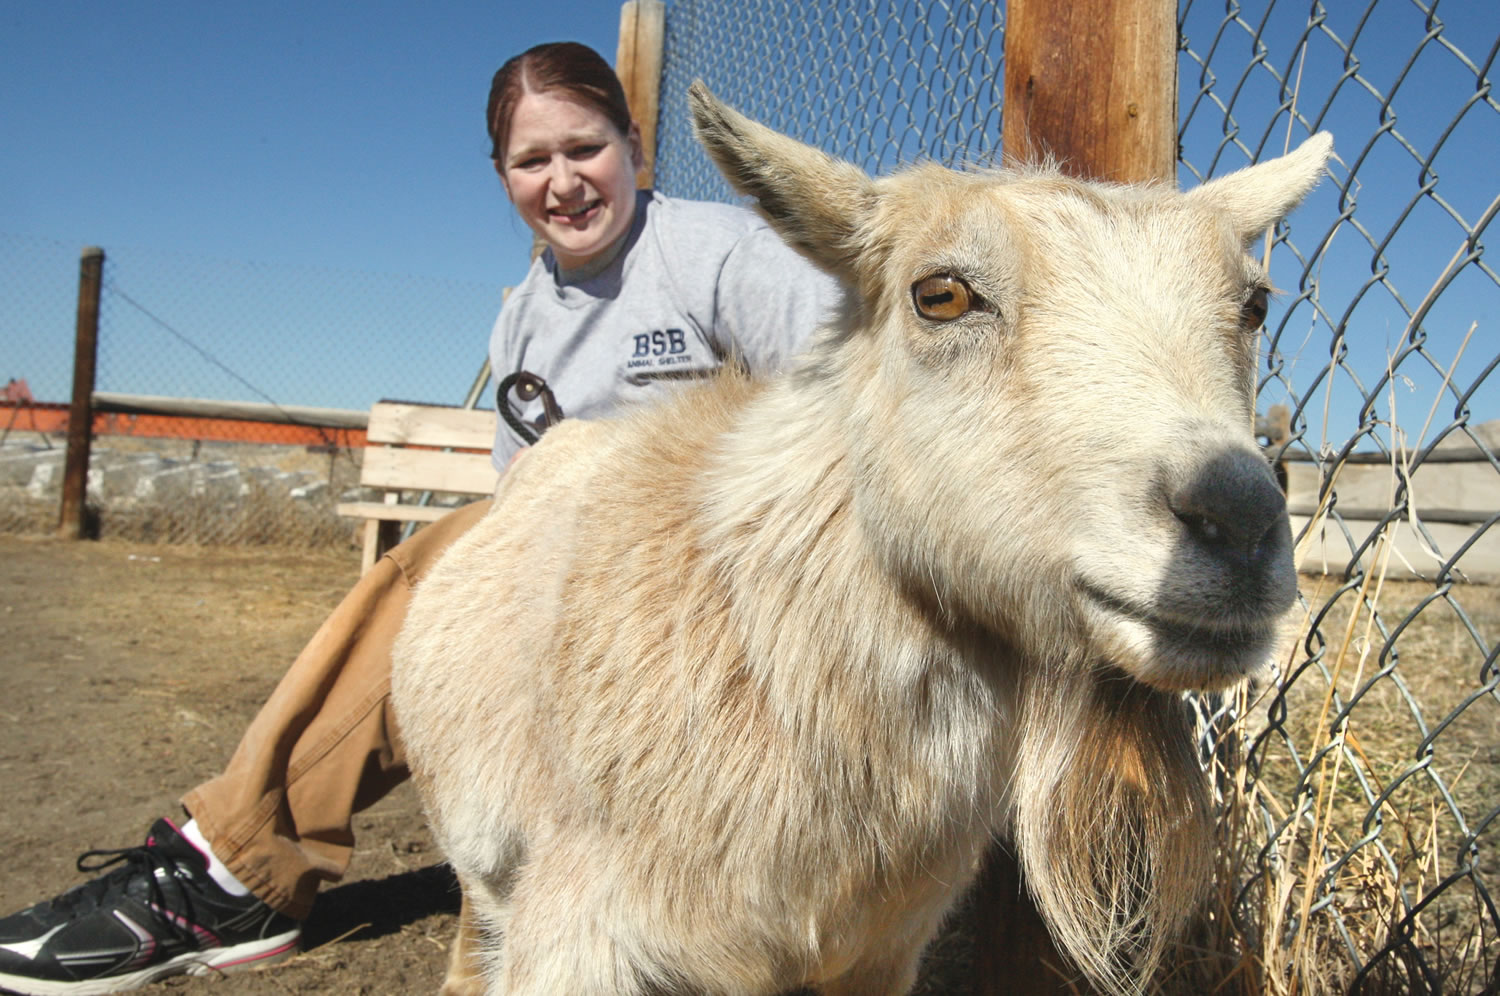 Butte-Silver Bow Animal Shelter supervisor Jacki Casagranda sits with Shirley, a pygmy goat, in Butte Mont.